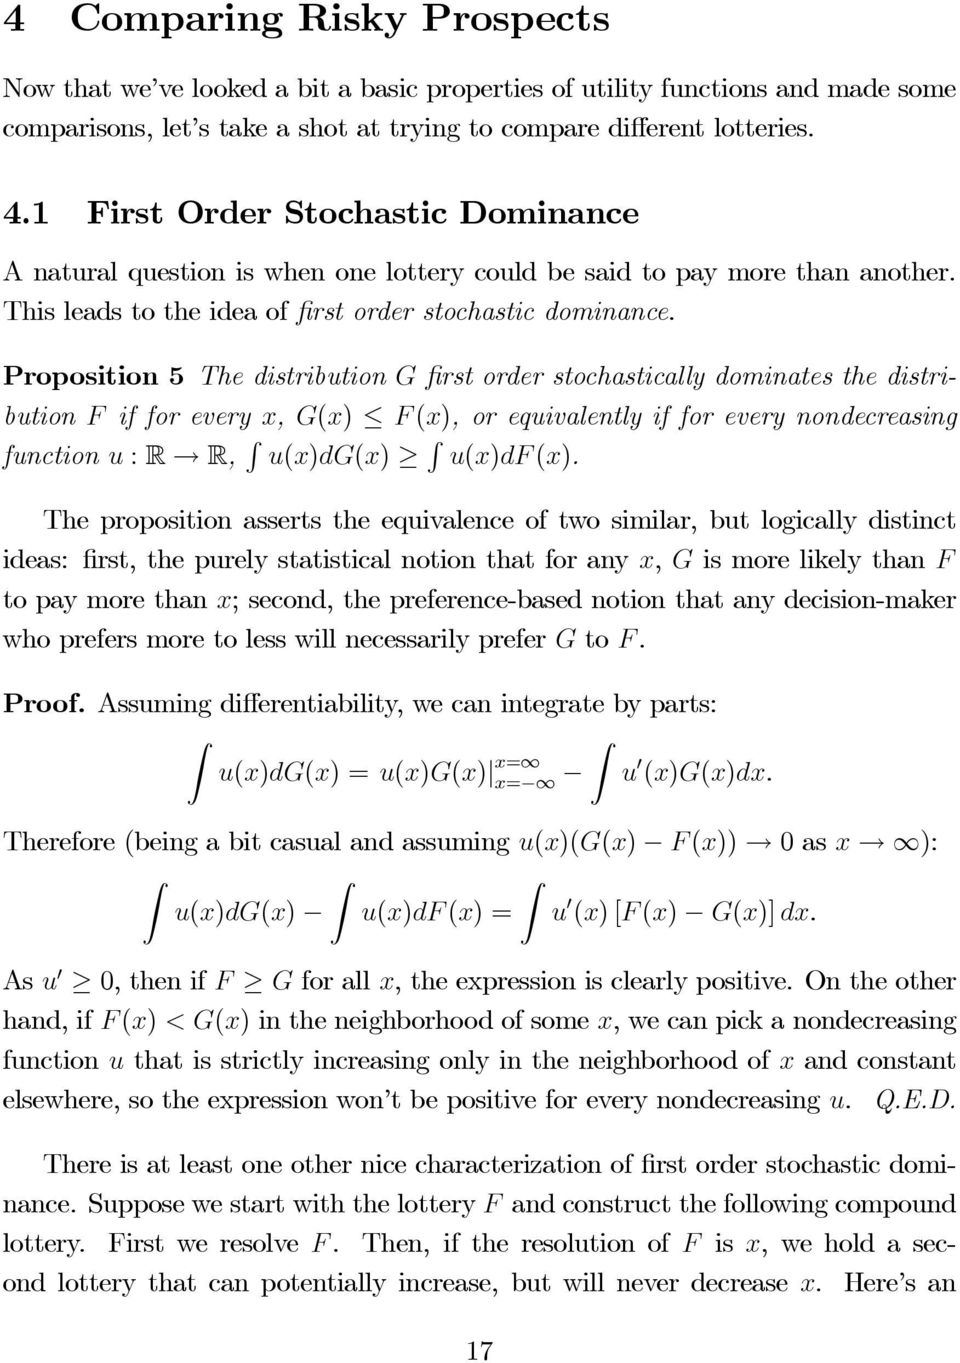 Proposition 5 The distribution G first order stochastically dominates the distribution F if for every x, G(x) F (x), or equivalently if for every nondecreasing function u : R R, R u(x)dg(x) R u(x)df